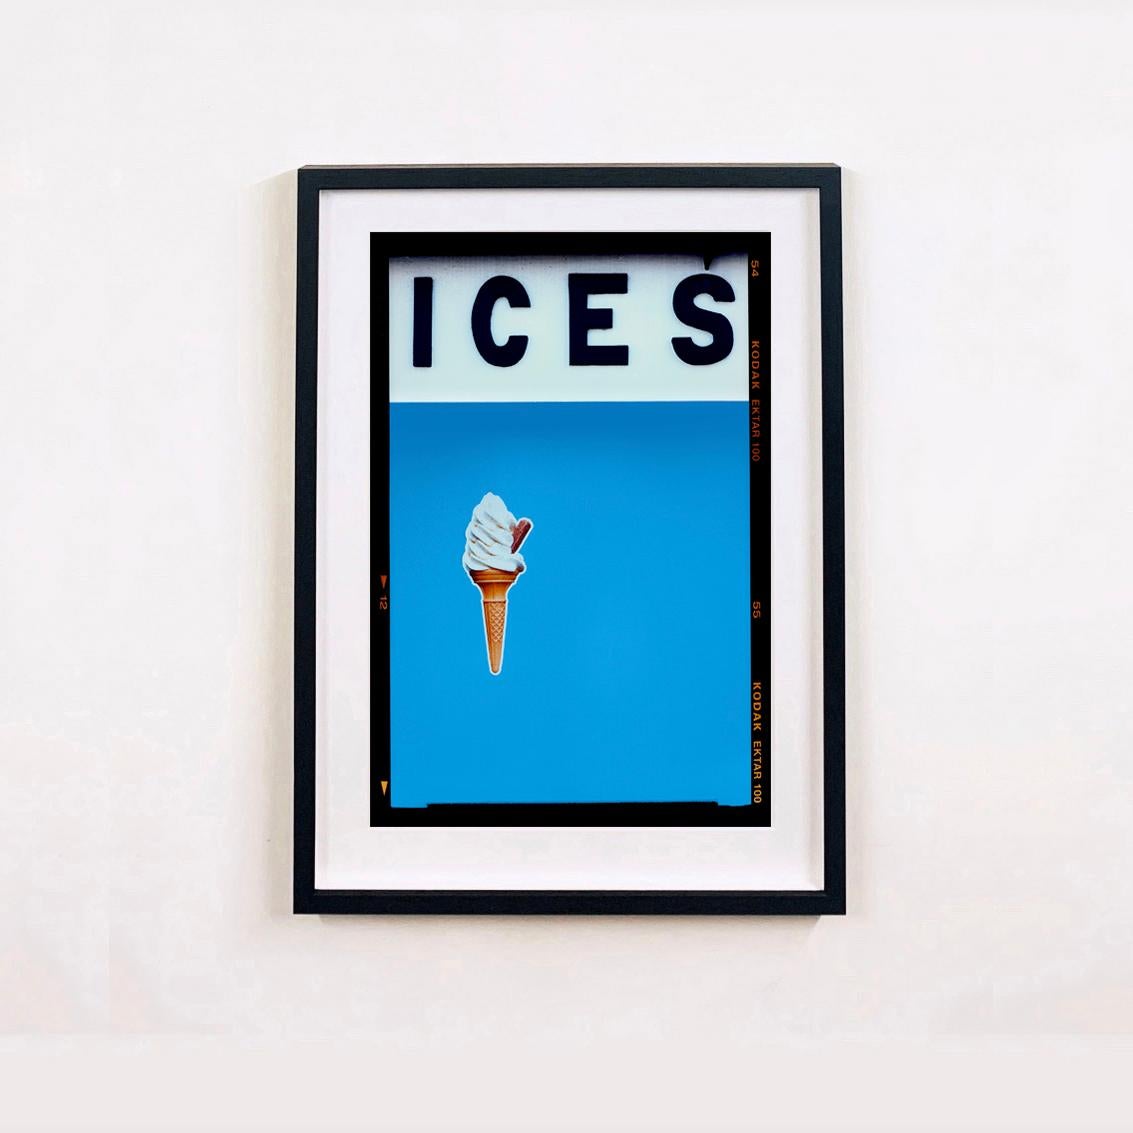 Ices (Sky Blue), Bexhill-on-Sea - British seaside color photography - Print by Richard Heeps